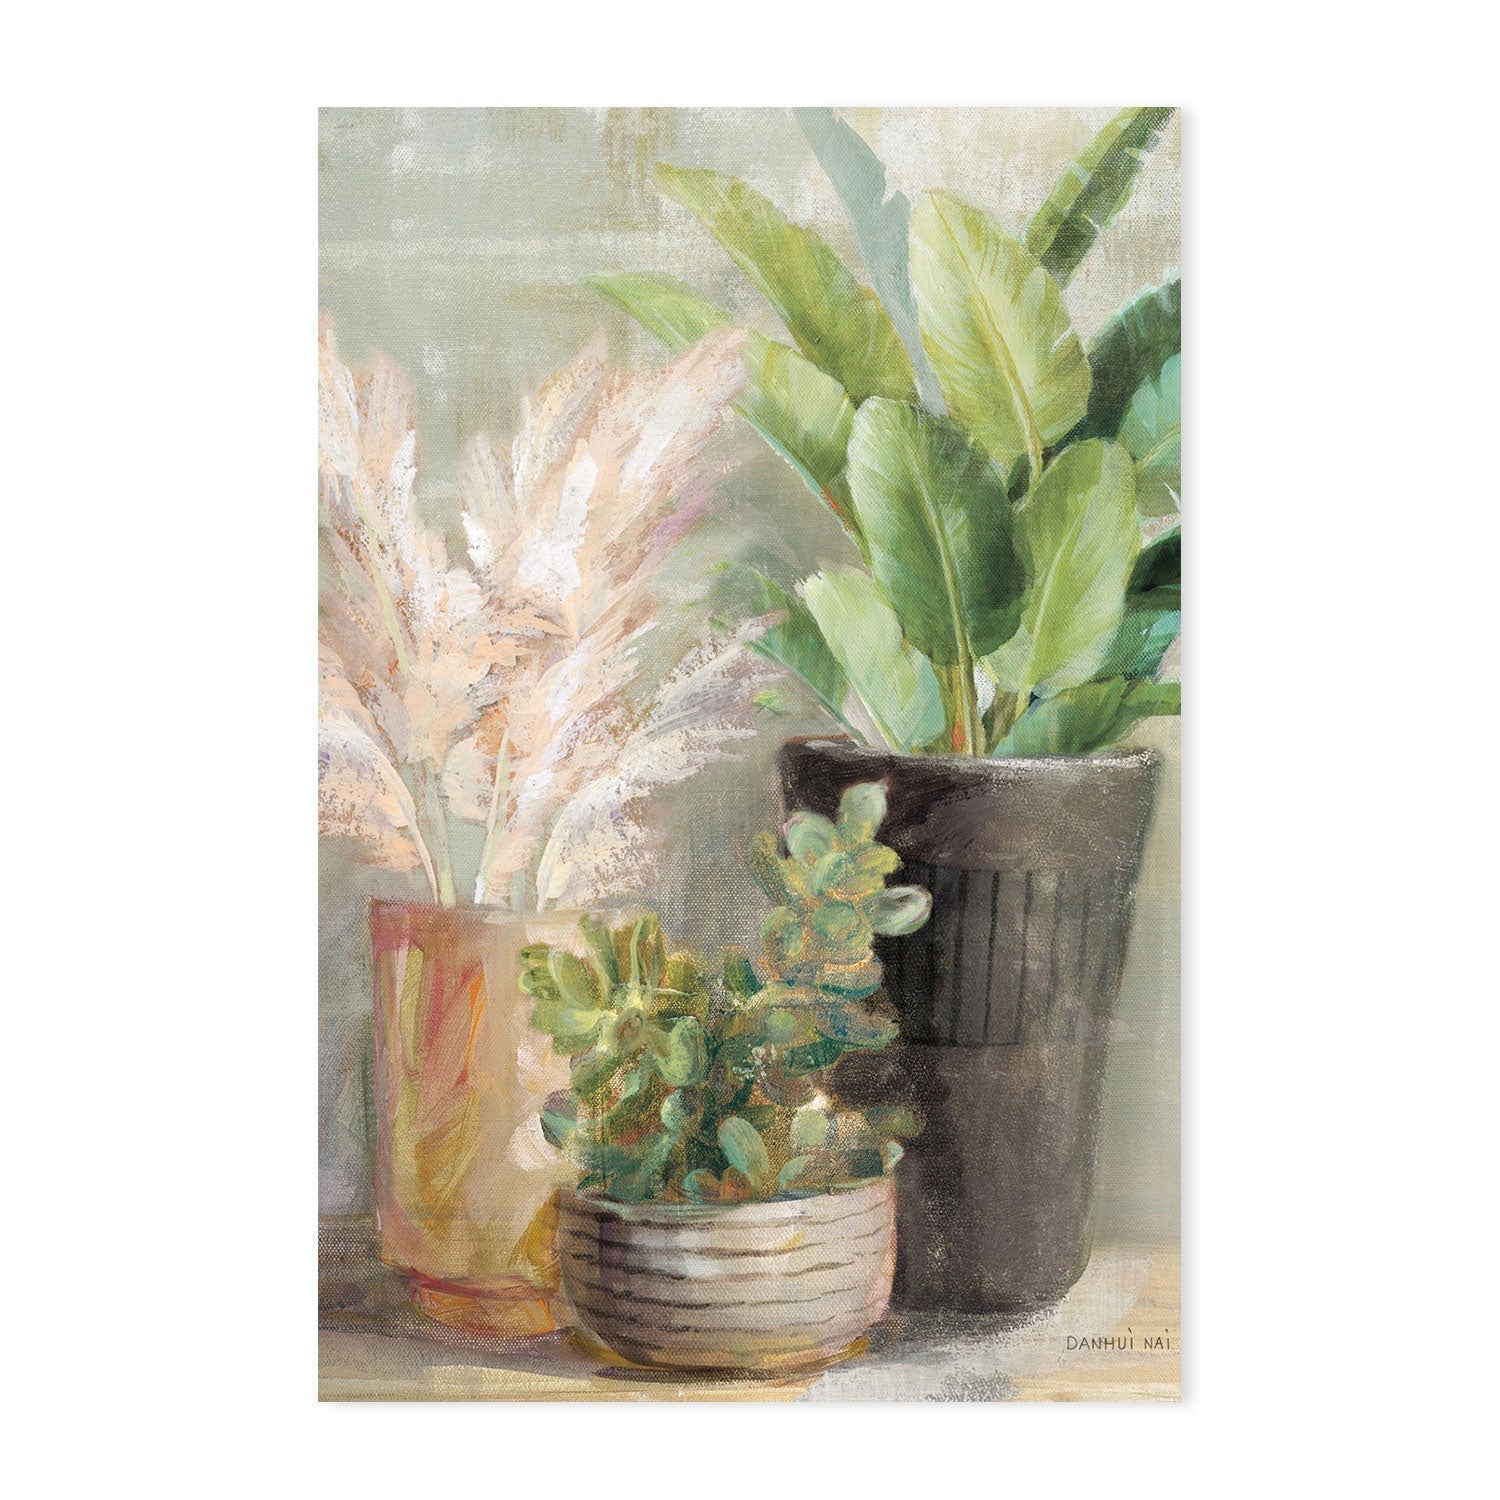 wall-art-print-canvas-poster-framed-Indoor Garden, Set of 2-by-Danhui Nai-Gioia Wall Art